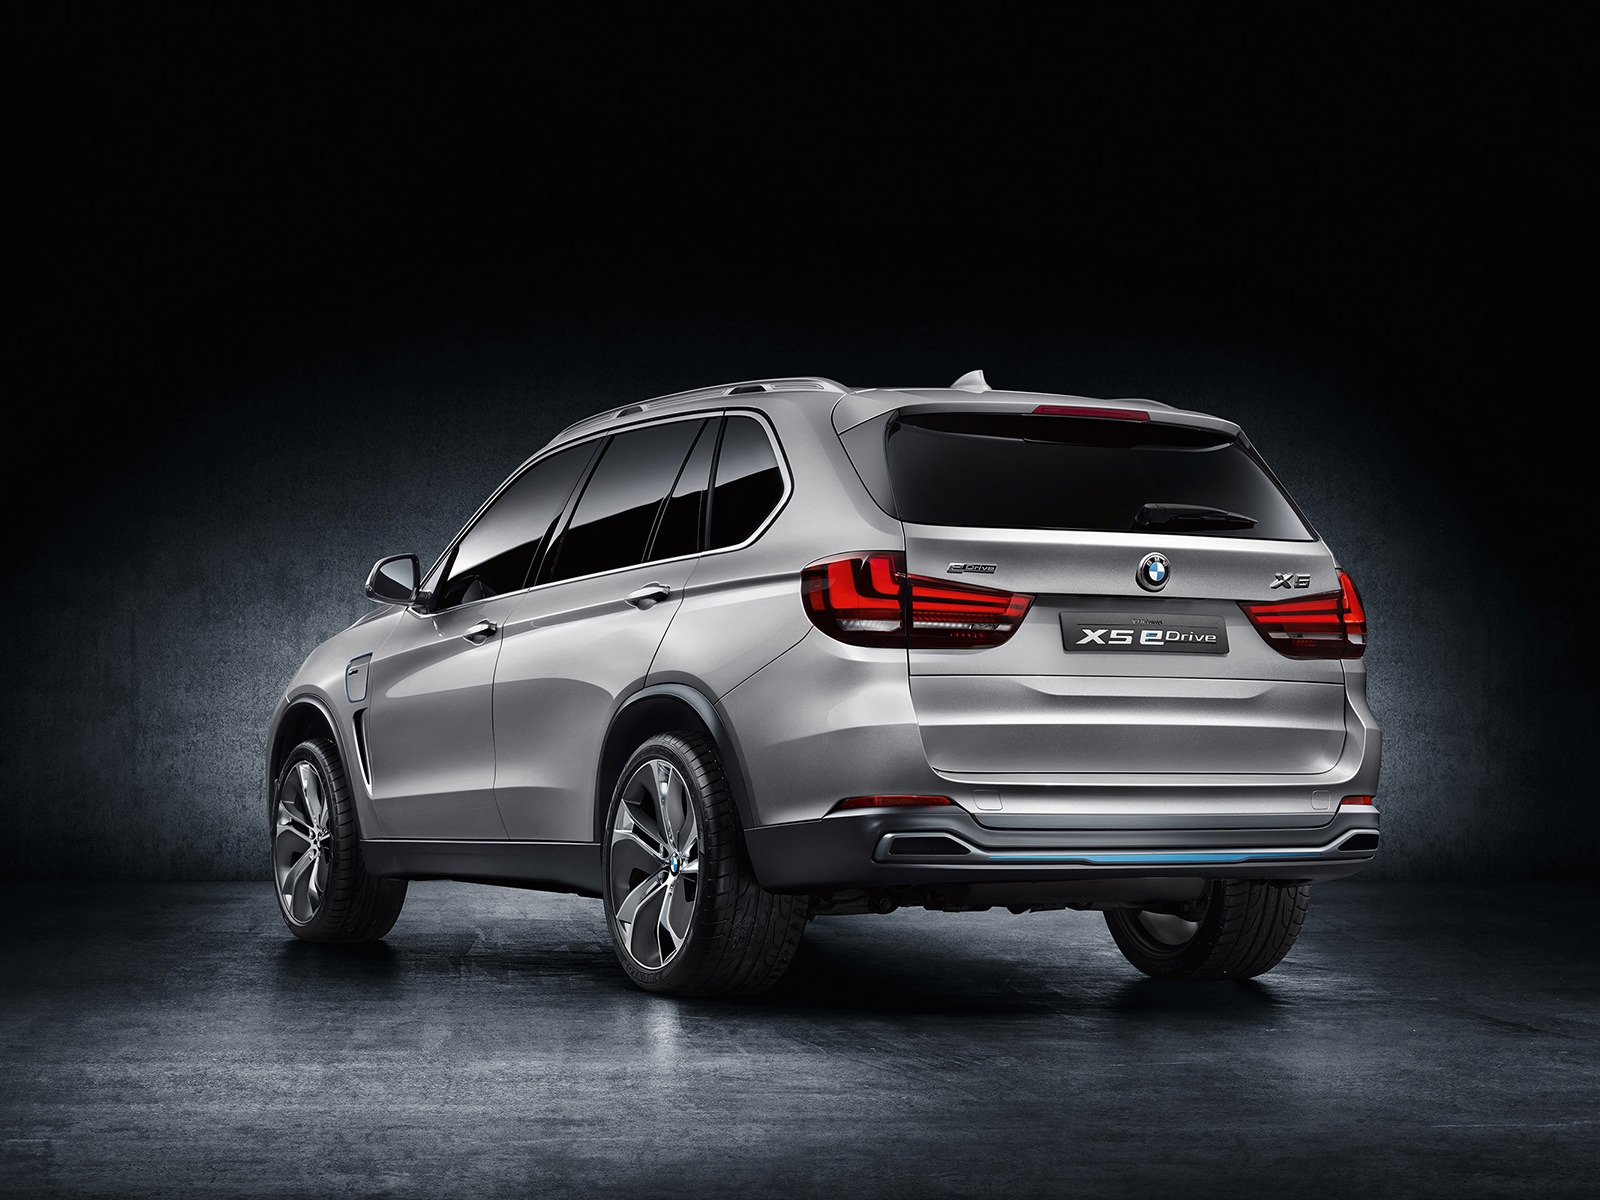 BMW X5 eDrive Concept Rear for 1600 x 1200 resolution